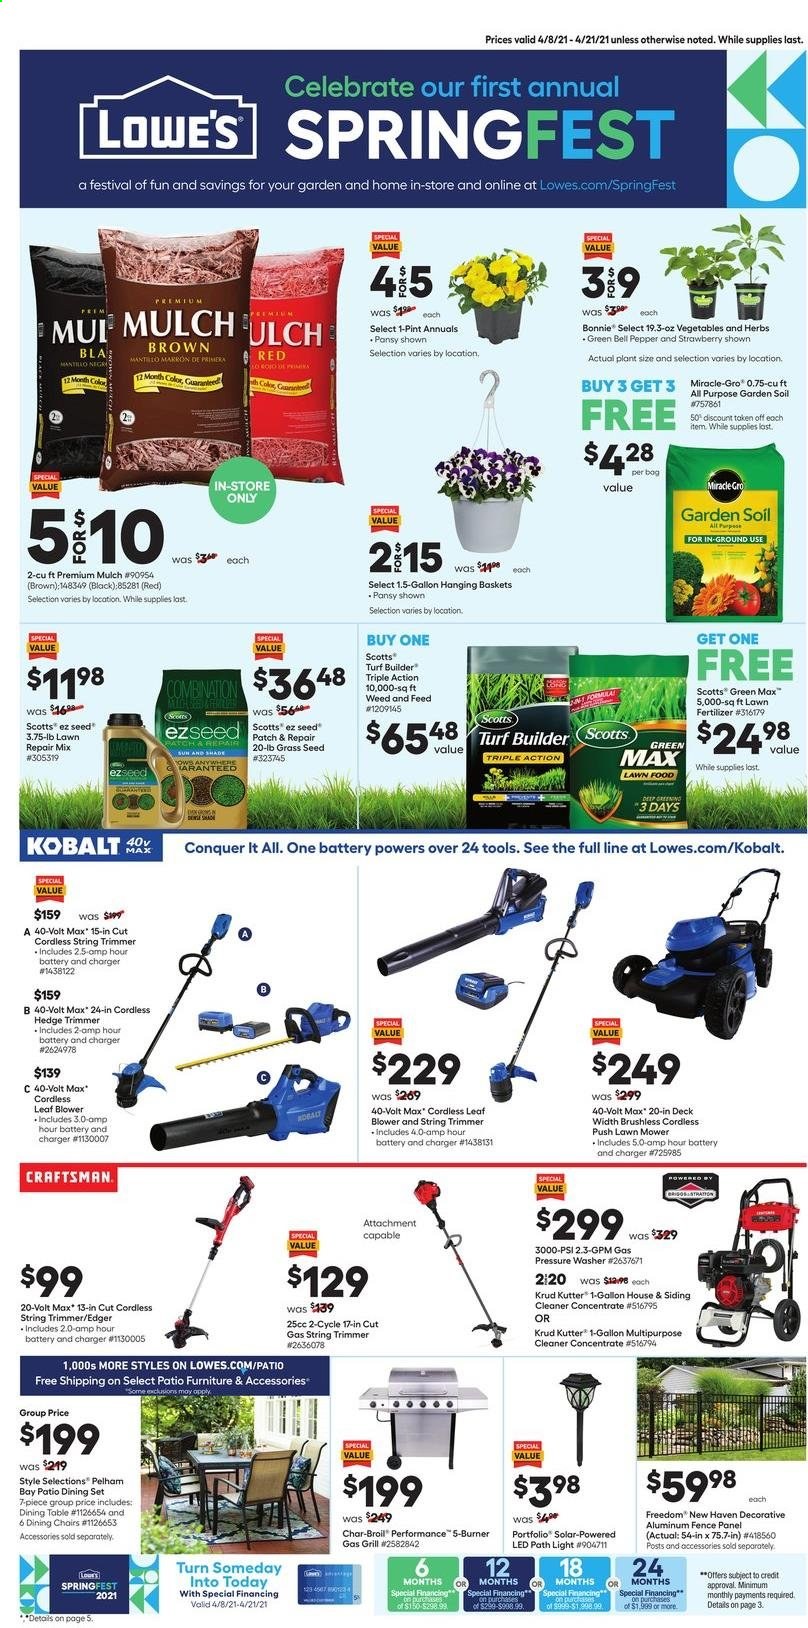 thumbnail - Lowe's Flyer - 04/08/2021 - 04/21/2021 - Sales products - cleaner, trimmer, basket, washing machine, table, patio furniture, gallon, siding, Craftsman, leaf blower, string trimmer, lawn mower, blower, pressure washer, gas grill, grill, plant seeds, herbs, fertilizer, turf builder, garden soil, fence panel, garden mulch. Page 1.